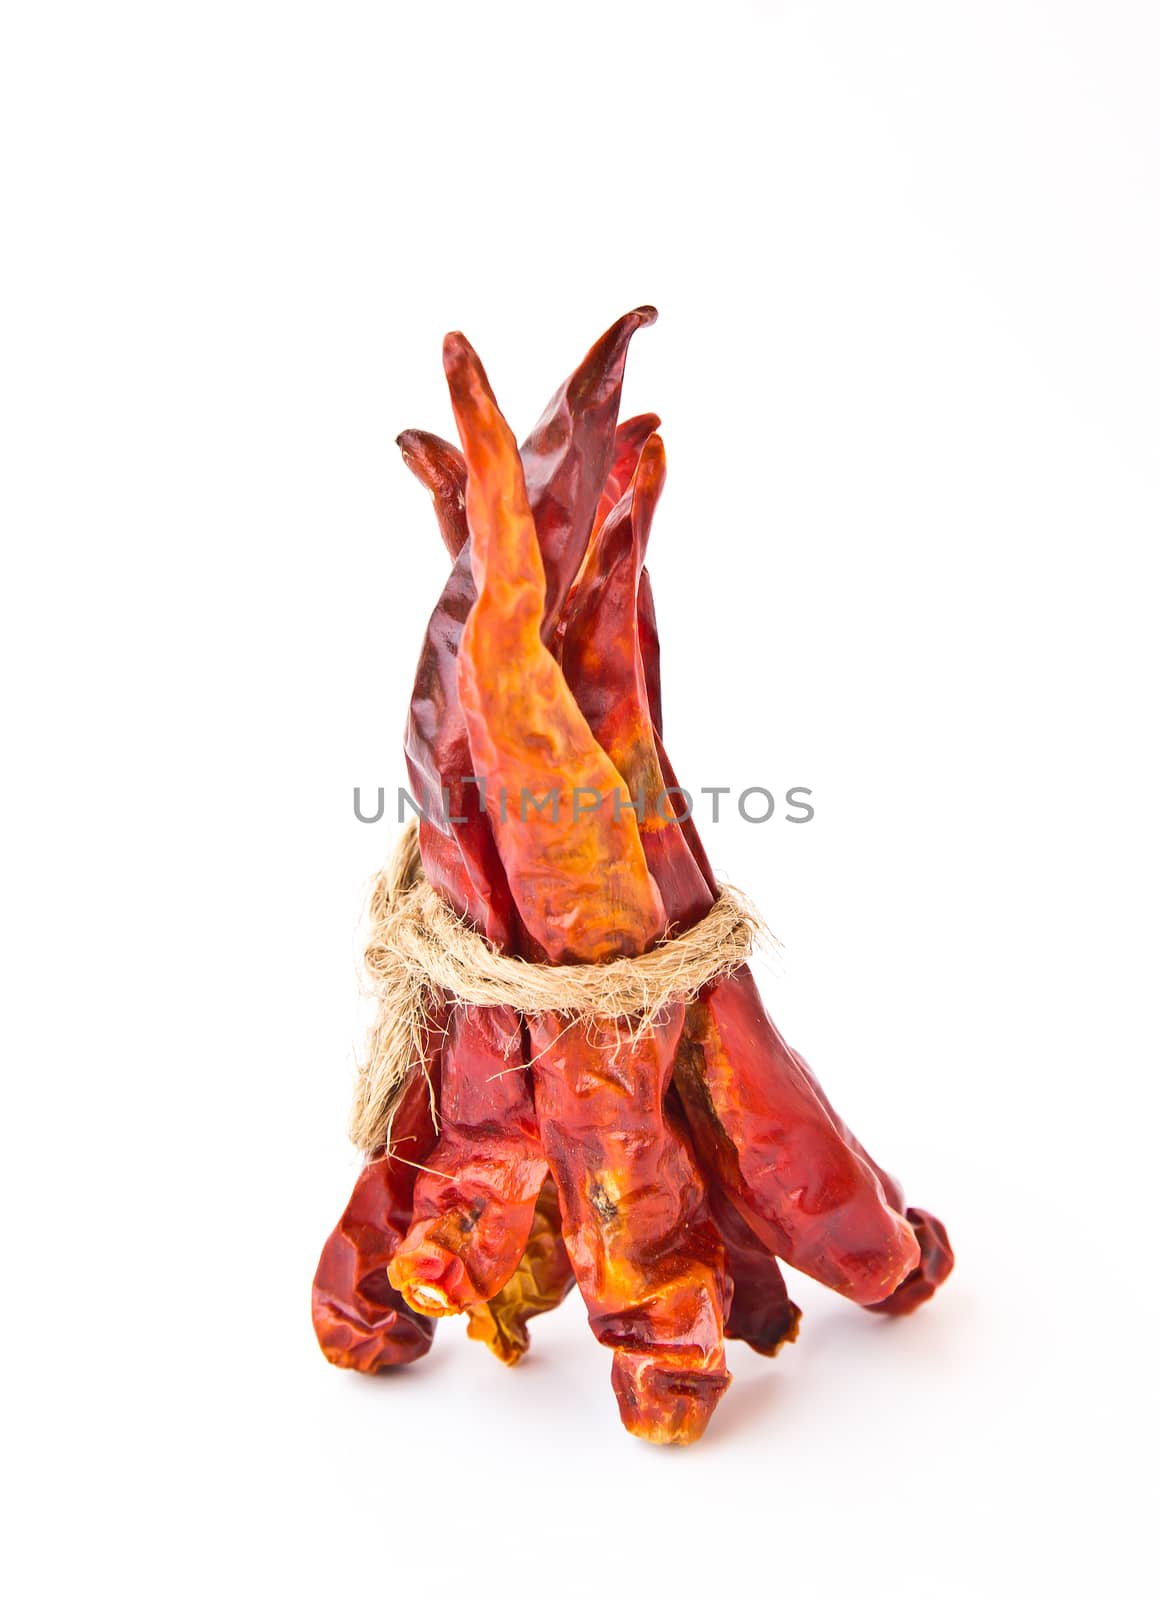 Dried chili peppers isolated  by den_rutchapong